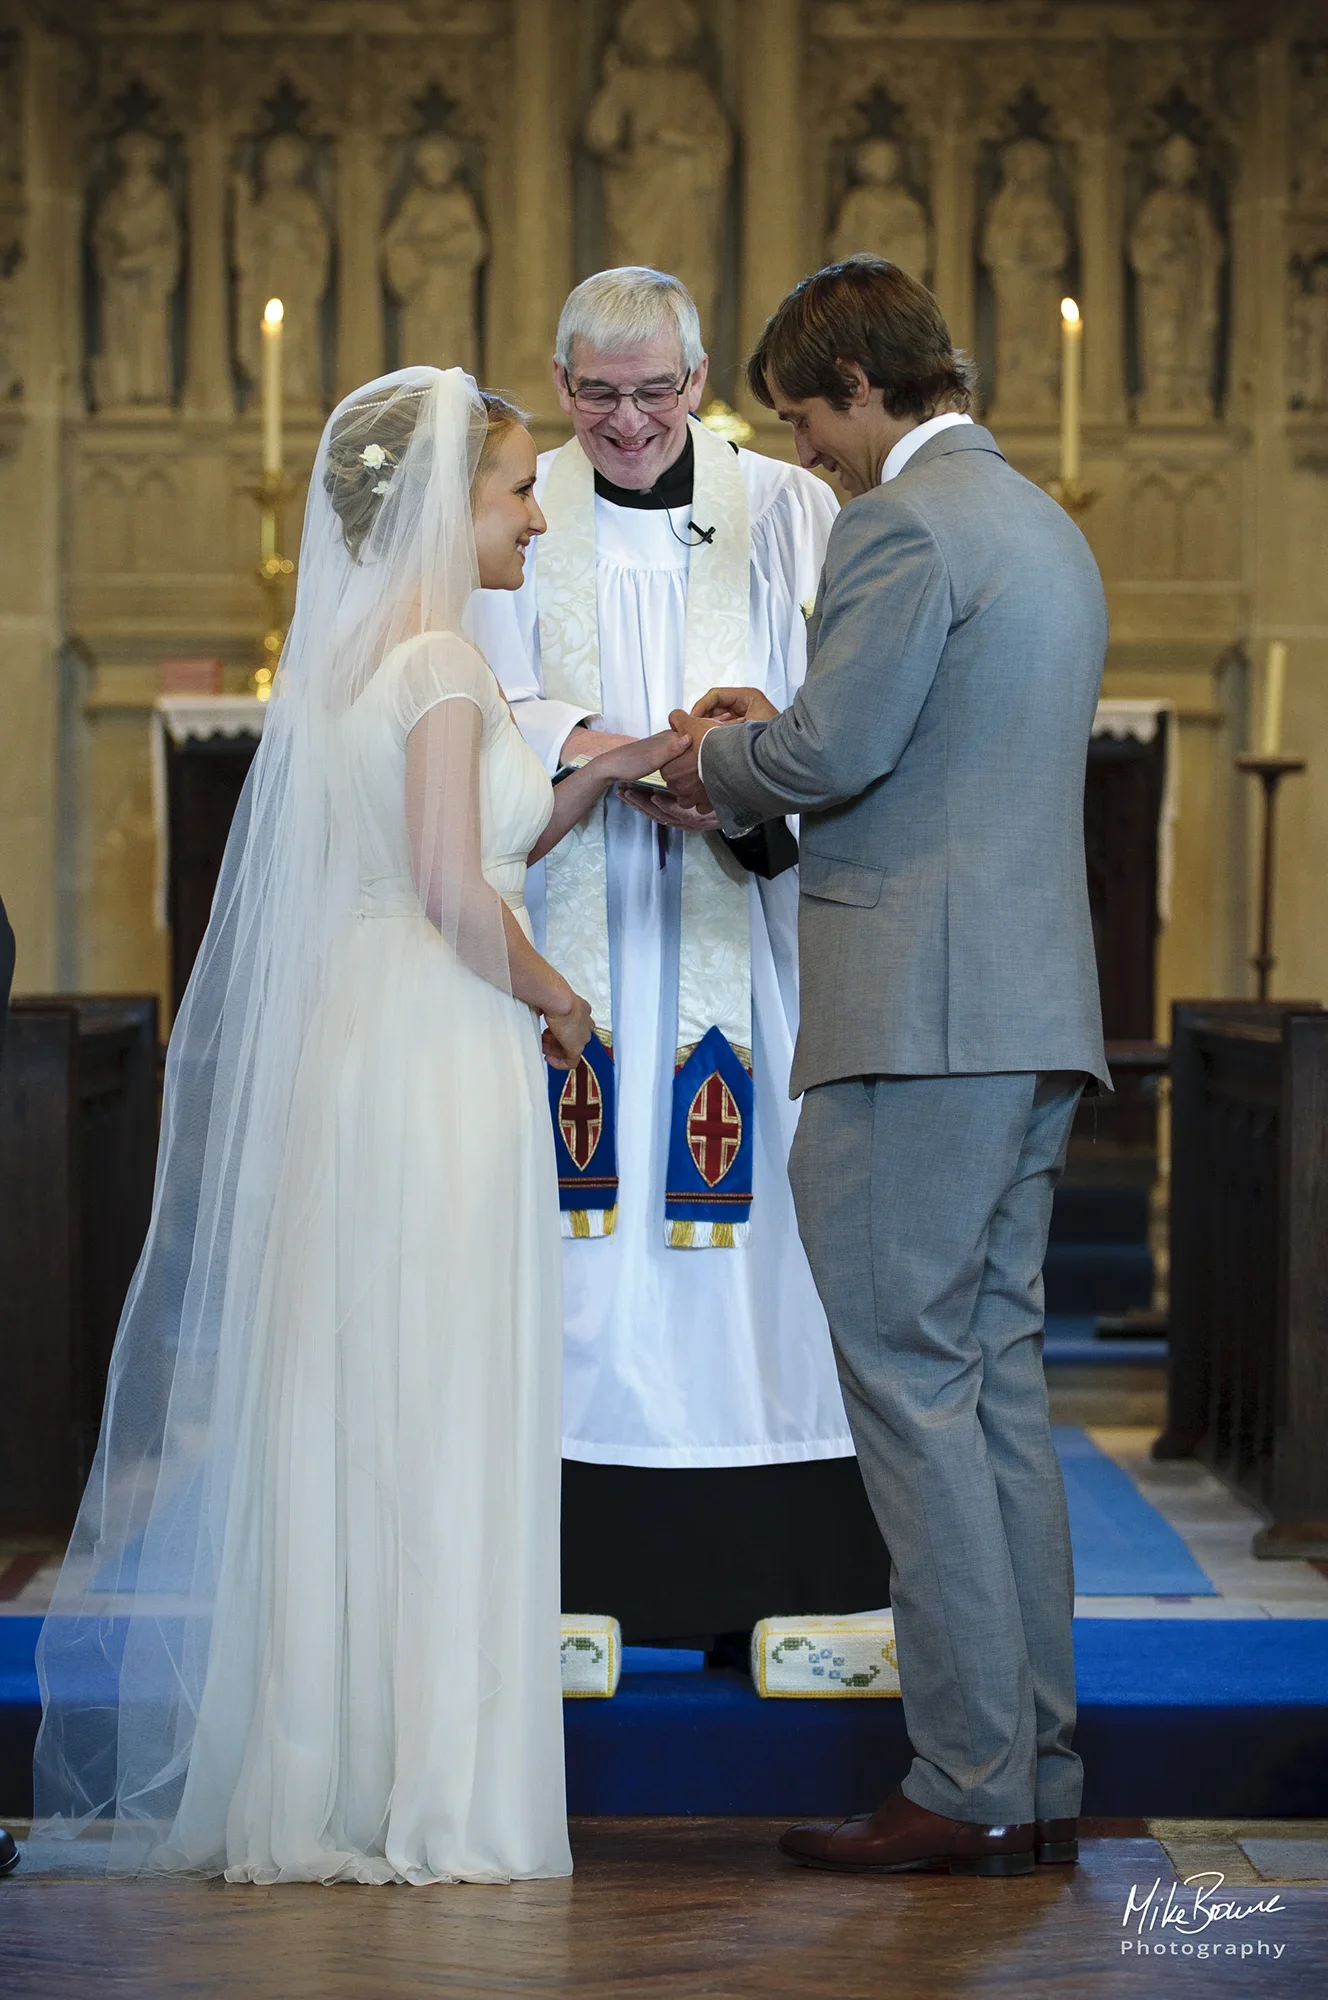 Bridegroom placing a wedding ring on his brides finger in front of a smiling vicar